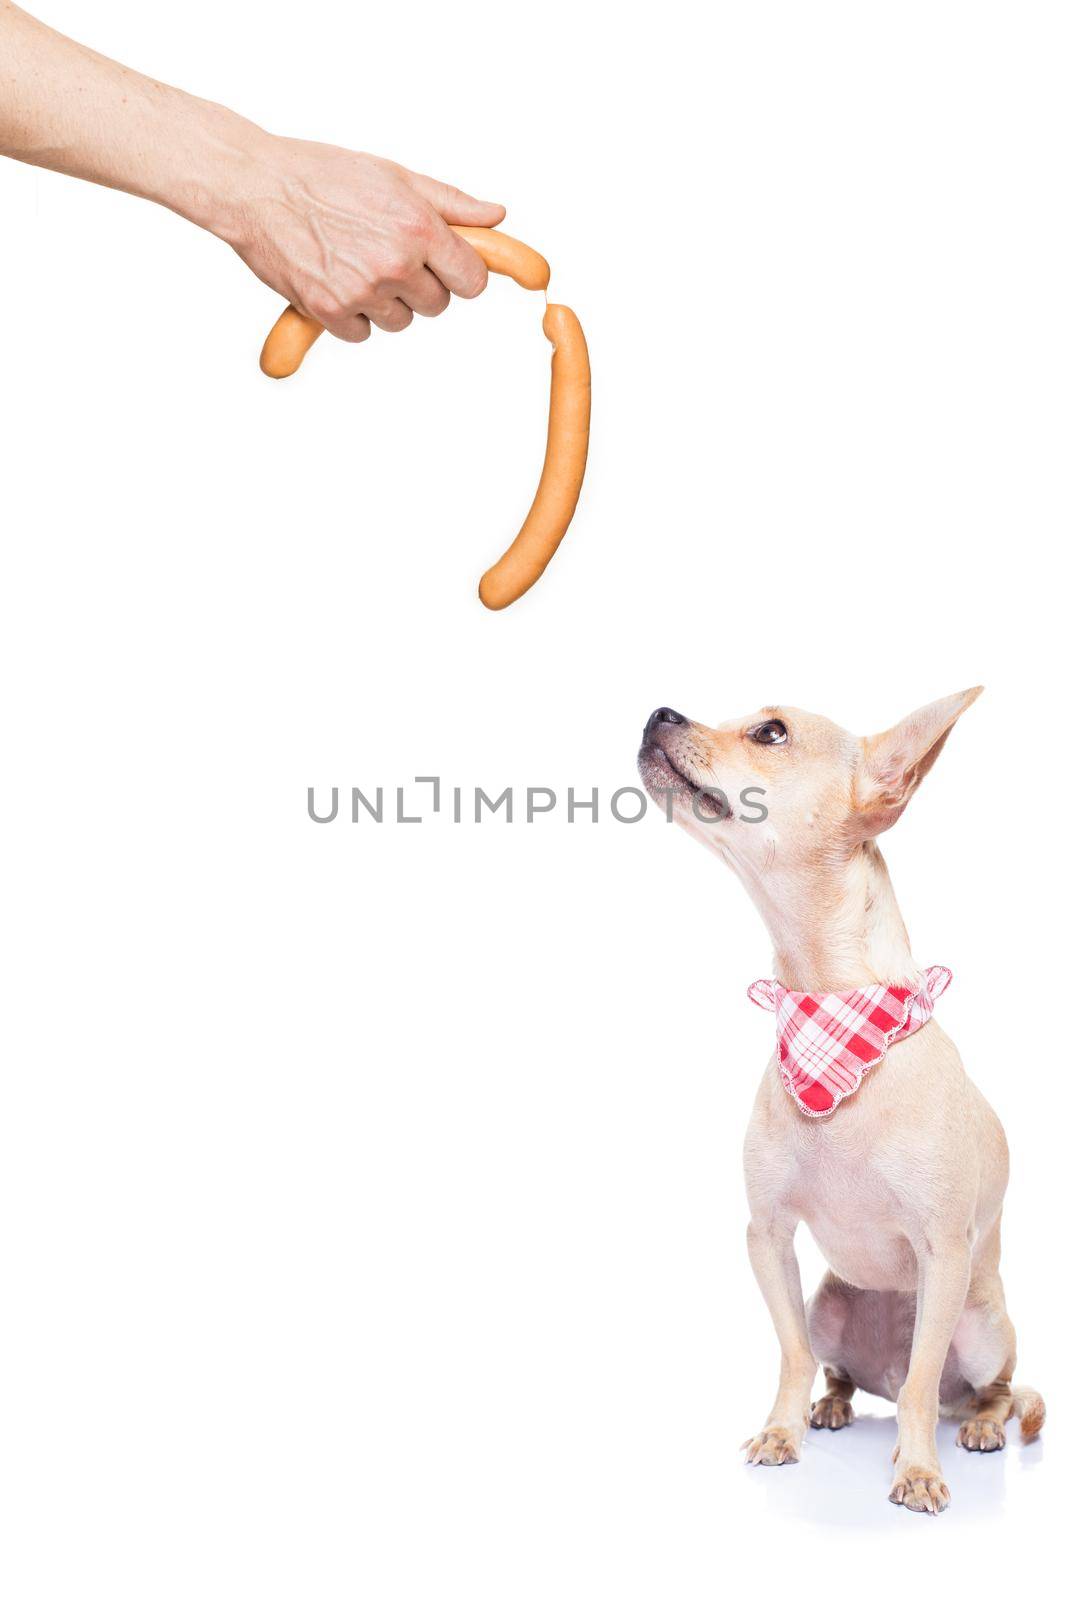 hungry chihuahua dog thinking and hoping for a treat or sausage by owner with hand,  isolated on white background